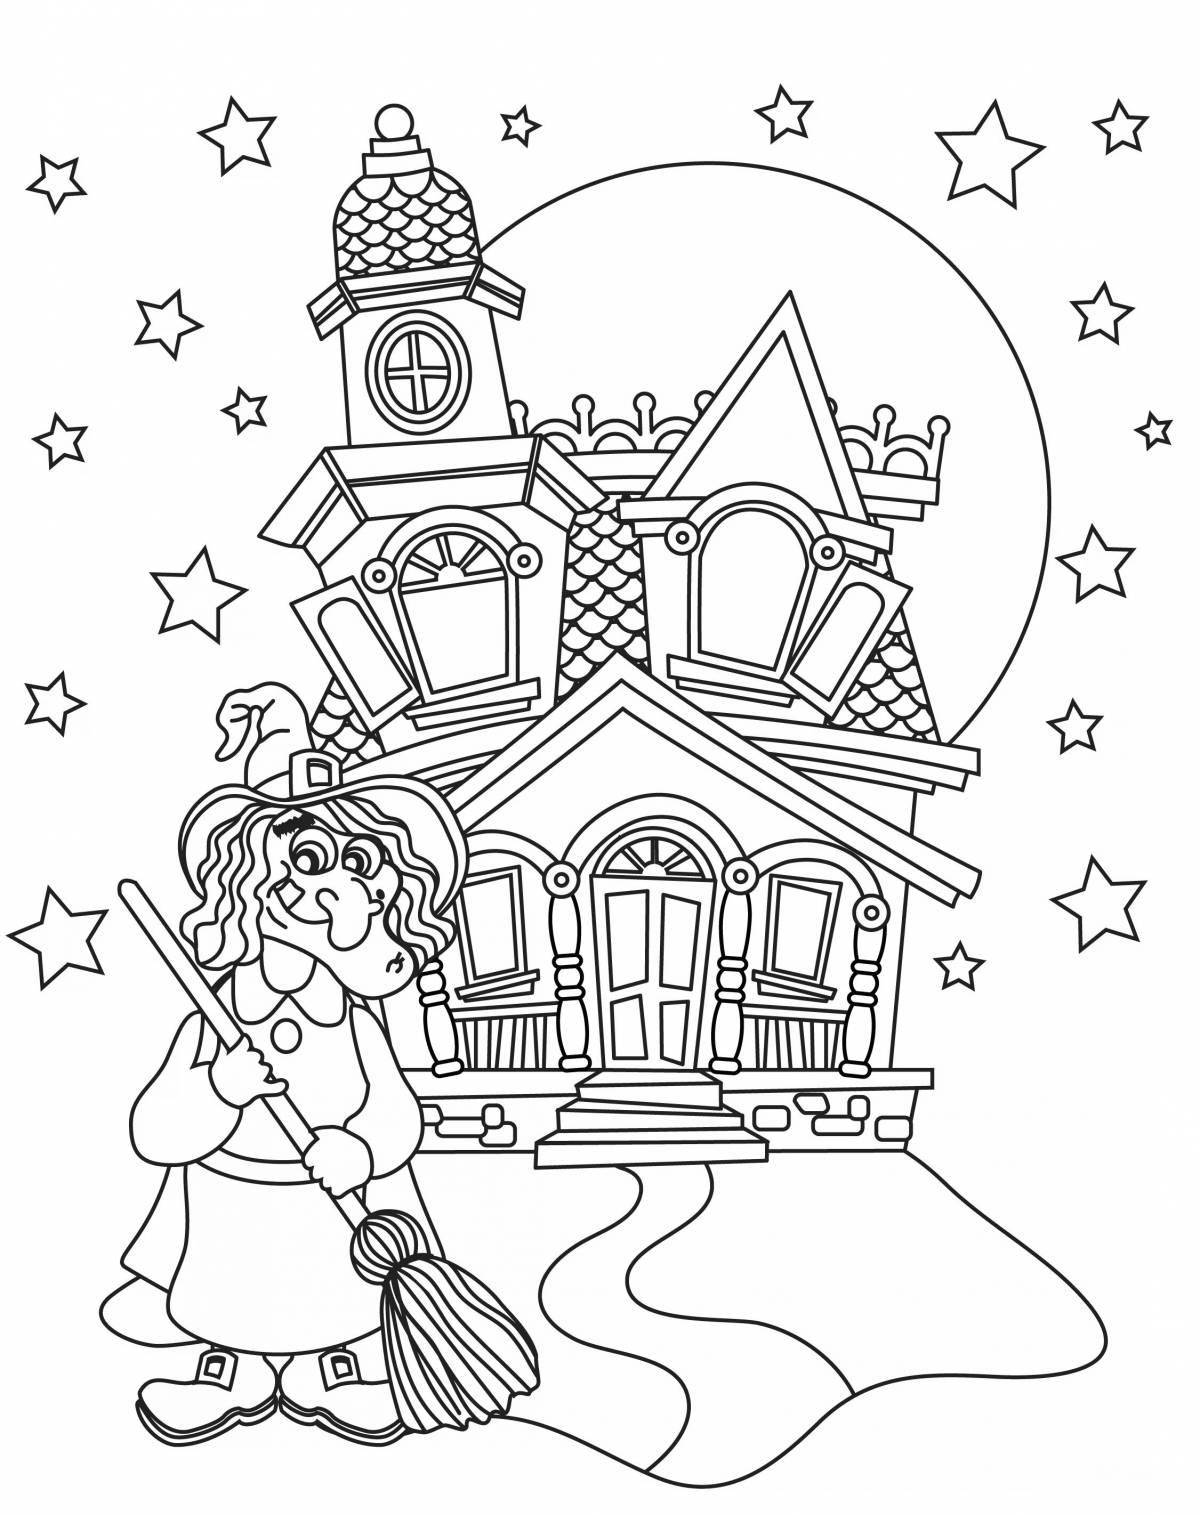 Fairytale coloring house princess for kids